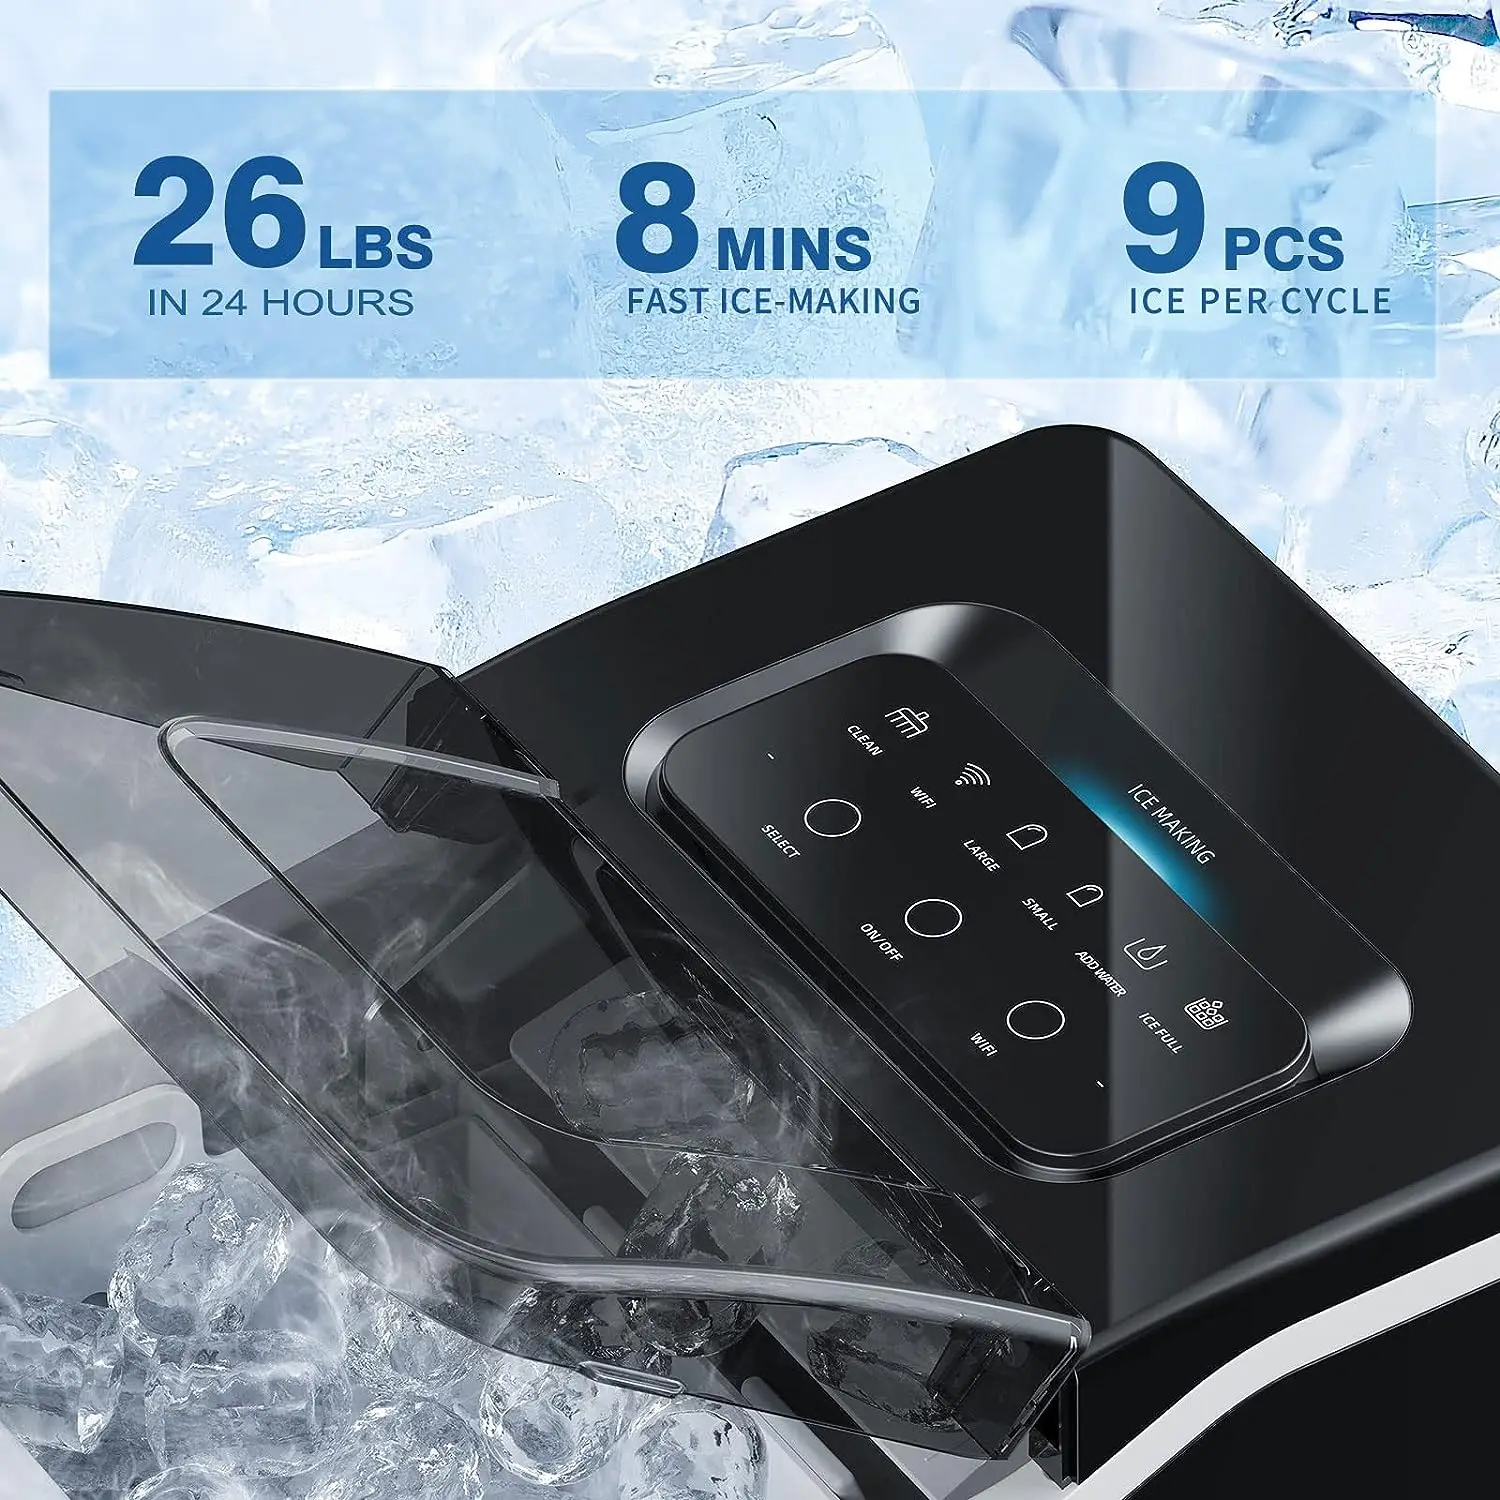 

Ice Maker Machine Countertop, with App Remote Control and Self-Cleaning Function, 9 Ice Cubes Ready in 8 Minutes, 26lbs Ice Cub